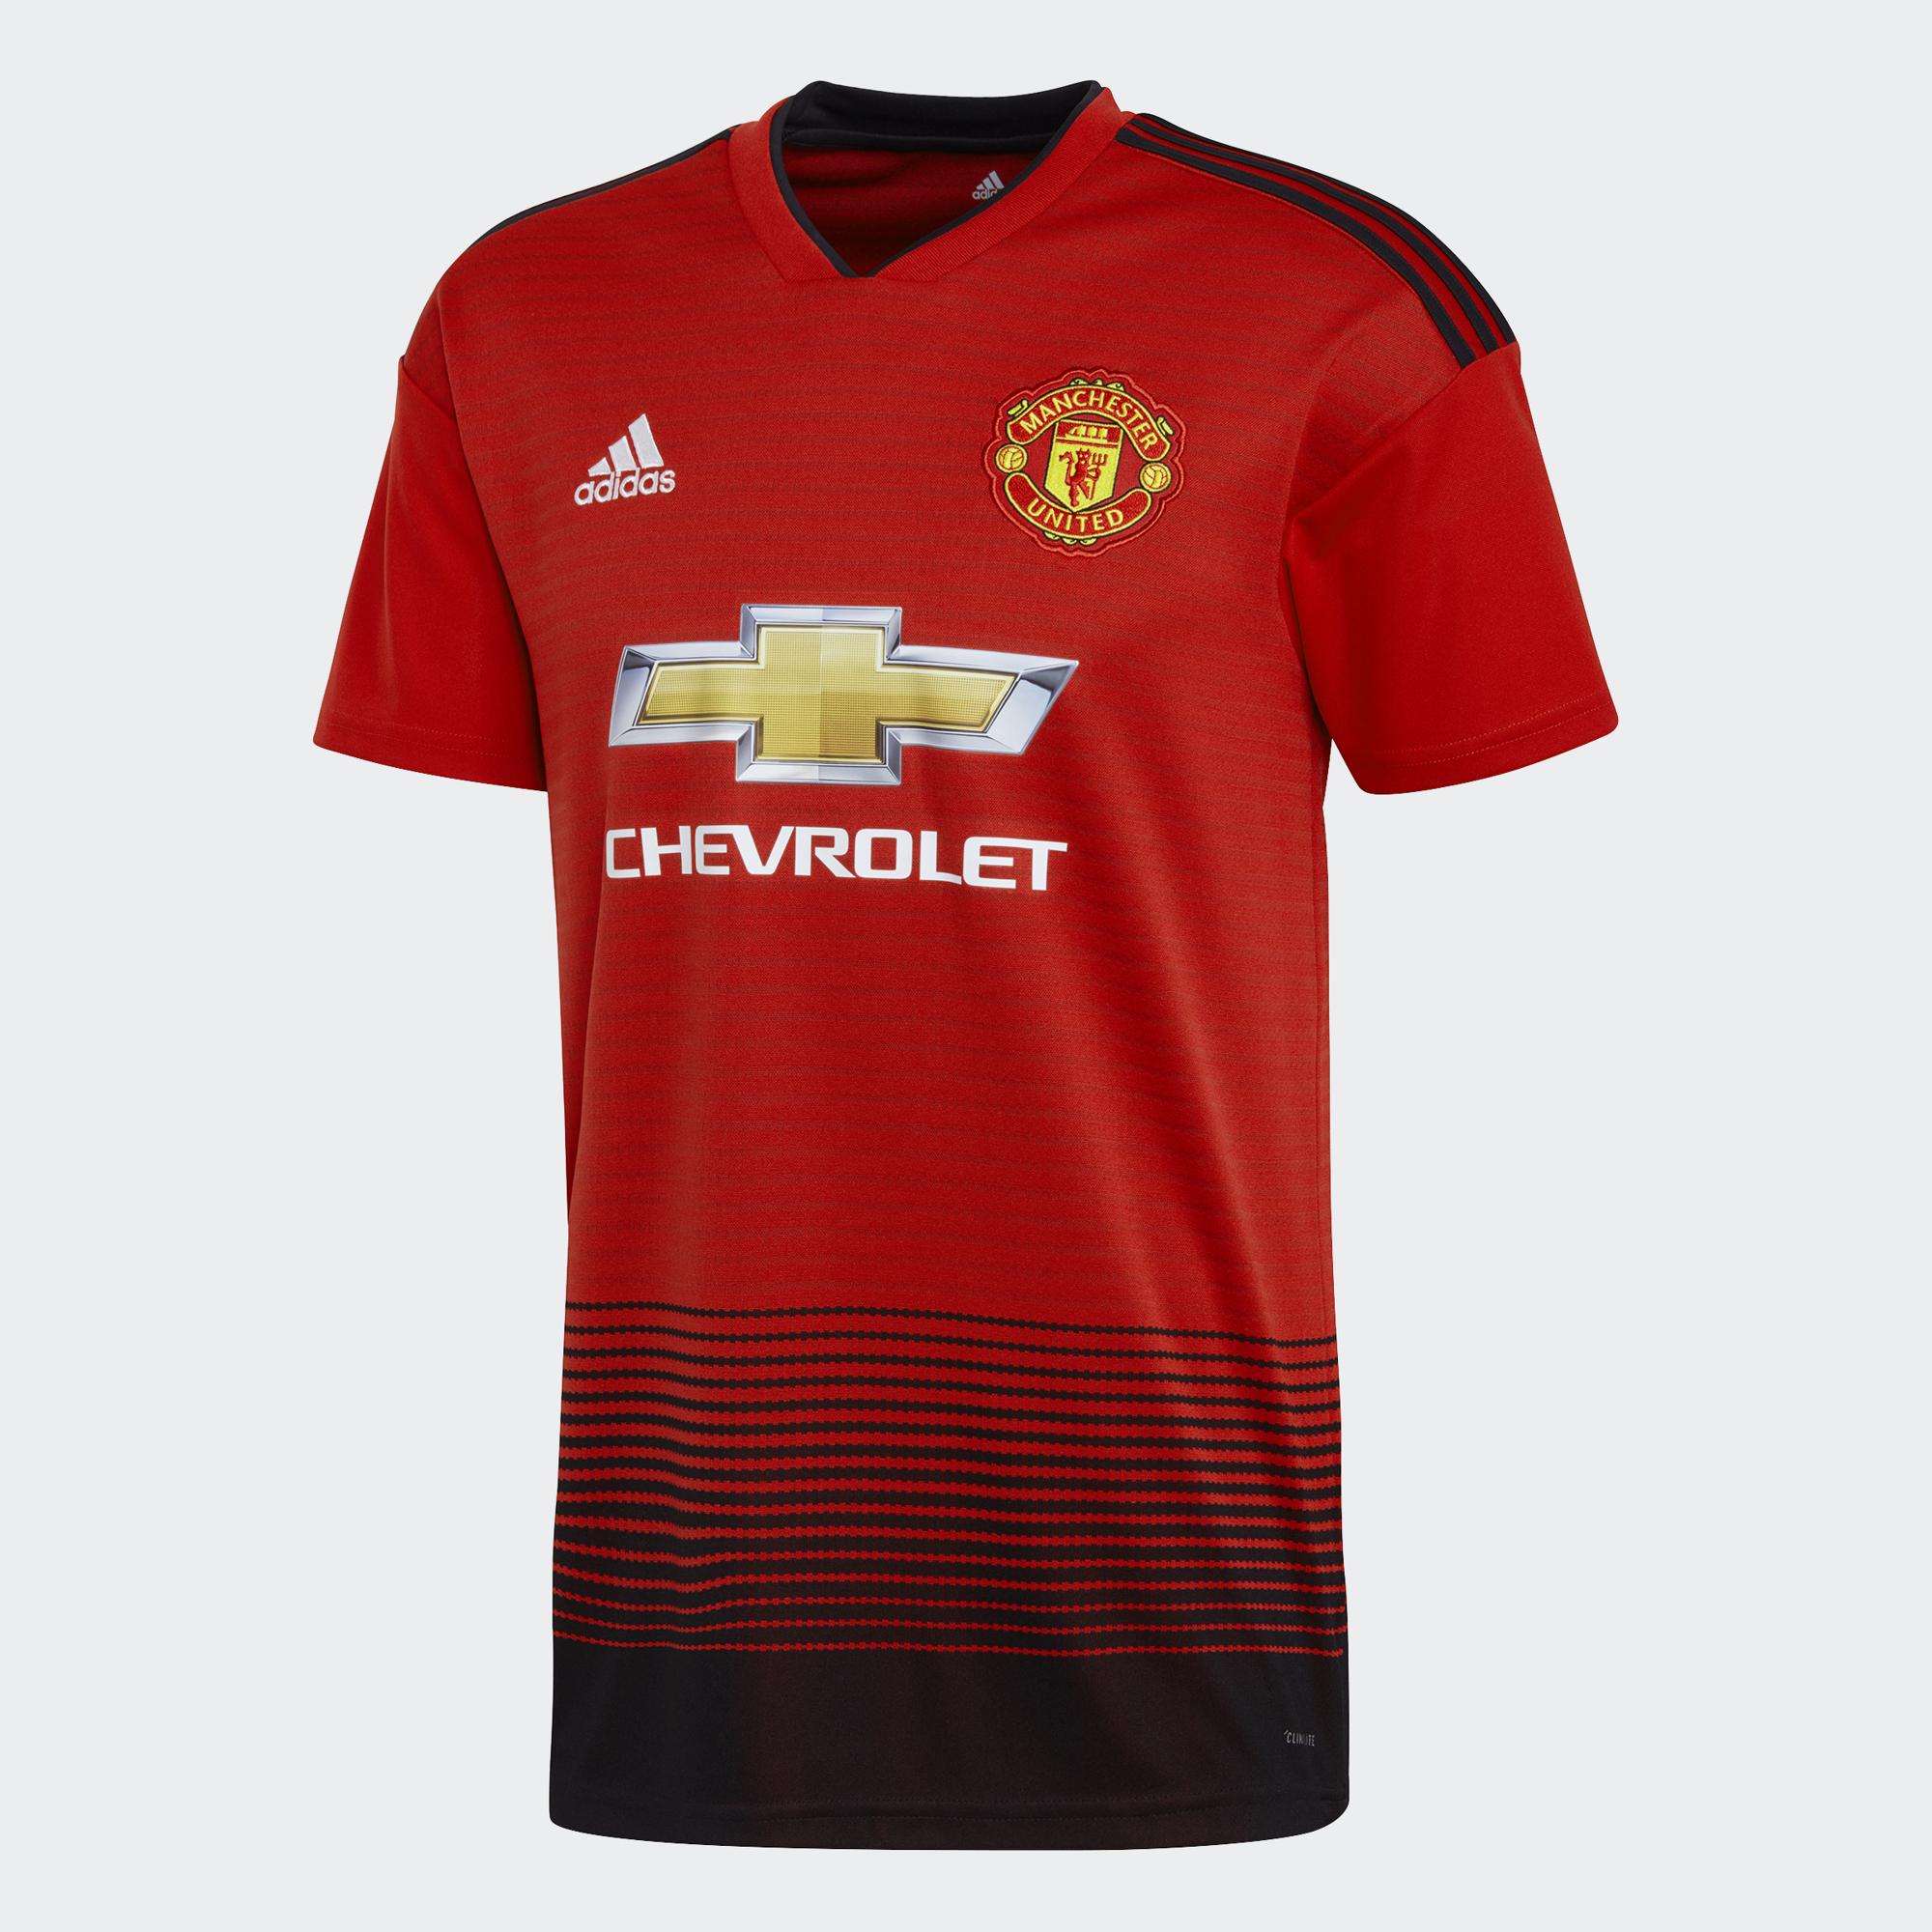 Adidas Jersey Home Manchester United   18/19